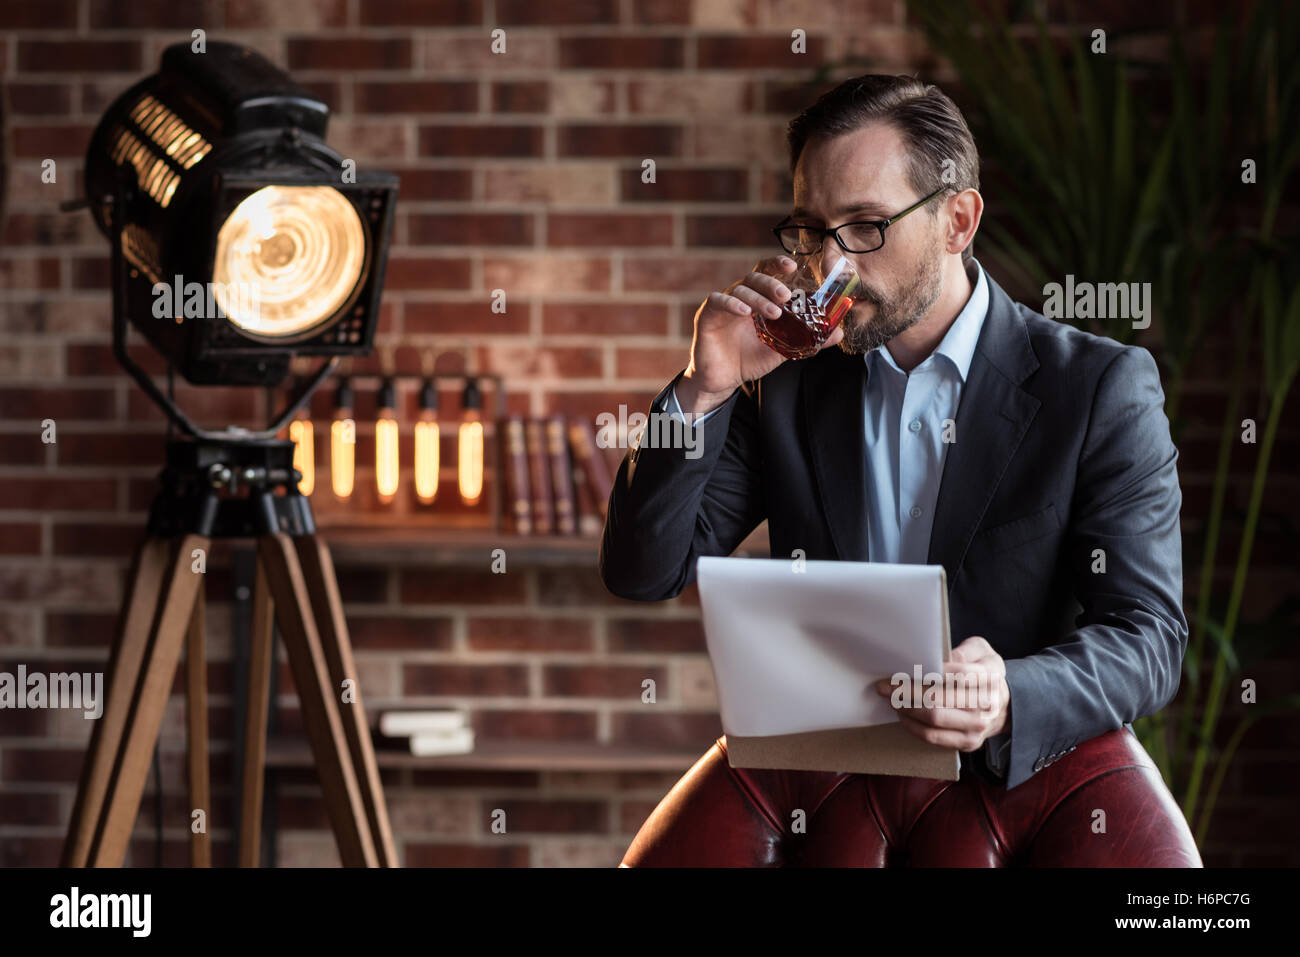 Serious stylish businessman taking a sip of whisky Stock Photo